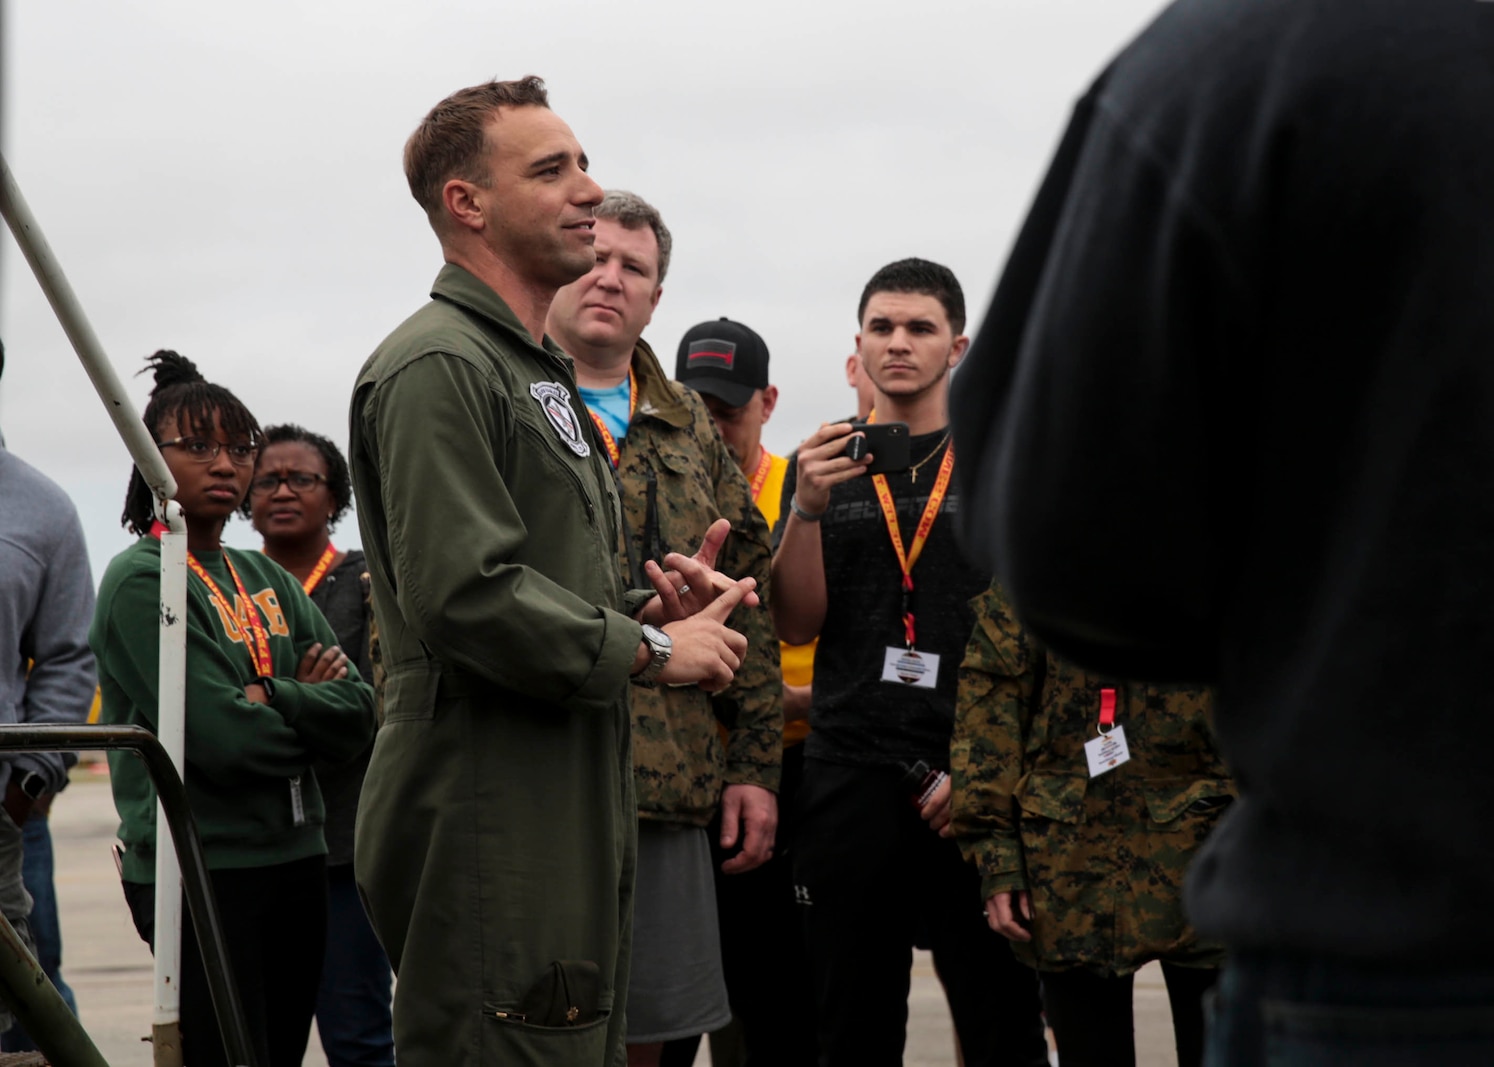 Maj. Joshua Rystrom, a naval aviator with Marine Fighter Attack Squadron 115, speaks to attendees of the Educators Workshop at Marine Corps Air Station Beaufort, South Carolina, Feb. 27, 2019. These educators traveled from Recruiting Station  Baton Rouge, Charlotte and Montgomery to experience the Educators Workshop. The workshop allows educators to have an inside look at educational benefits and career opportunities in the Marine Corps. (U.S. Marine Corps photo by Lance Cpl. Jack A. E. Rigsby)